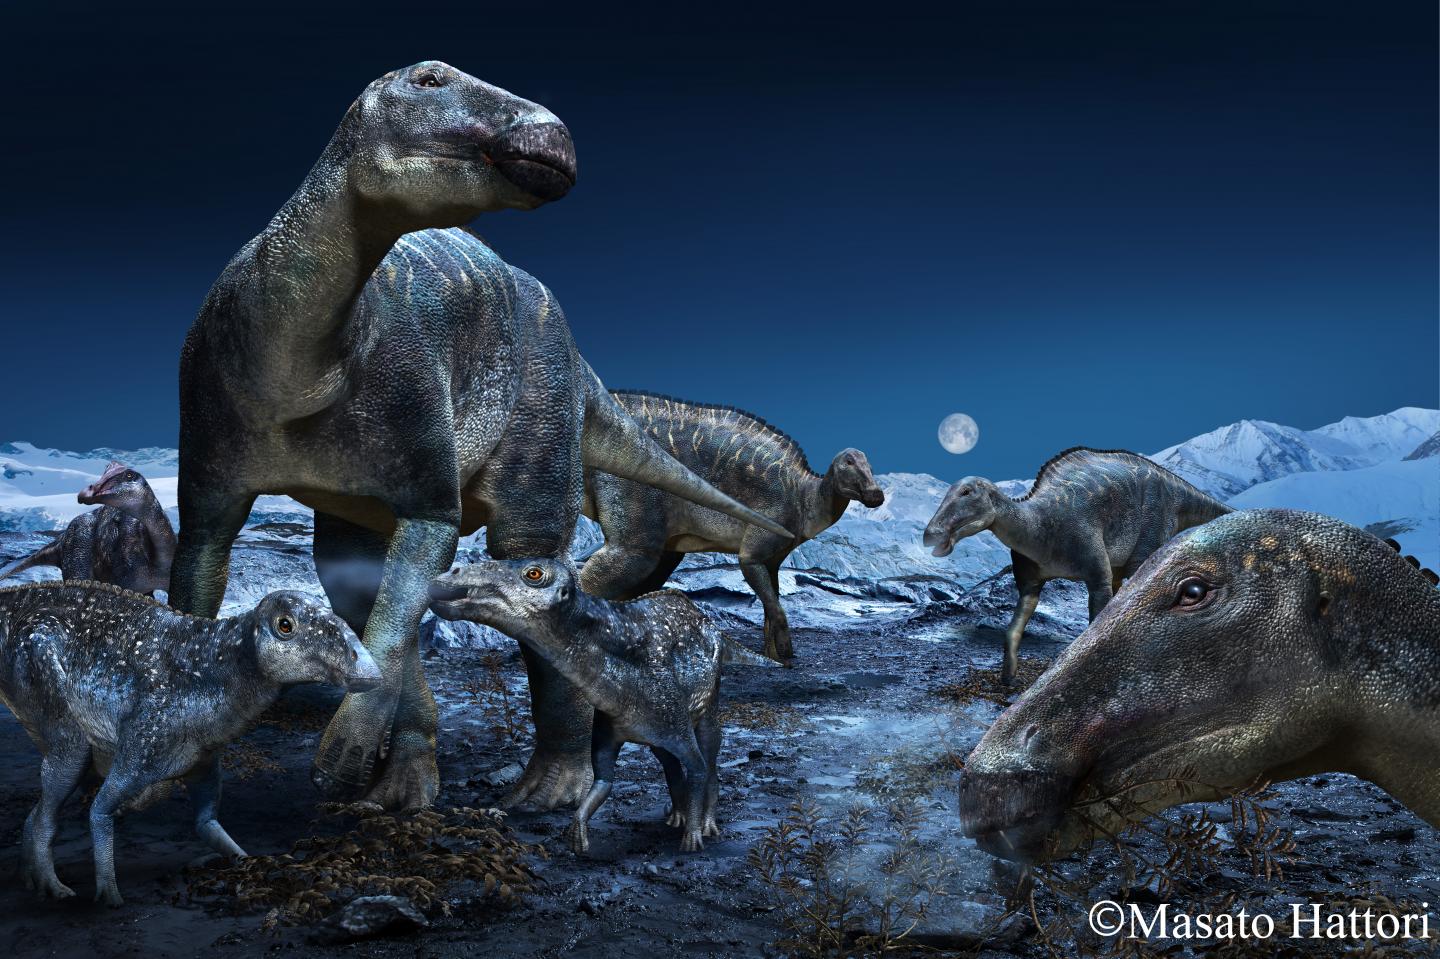 The 70 million-year-old Prince Creek Formation featuring dinosaurs of ancient Arctic as genus Edmontosaurus